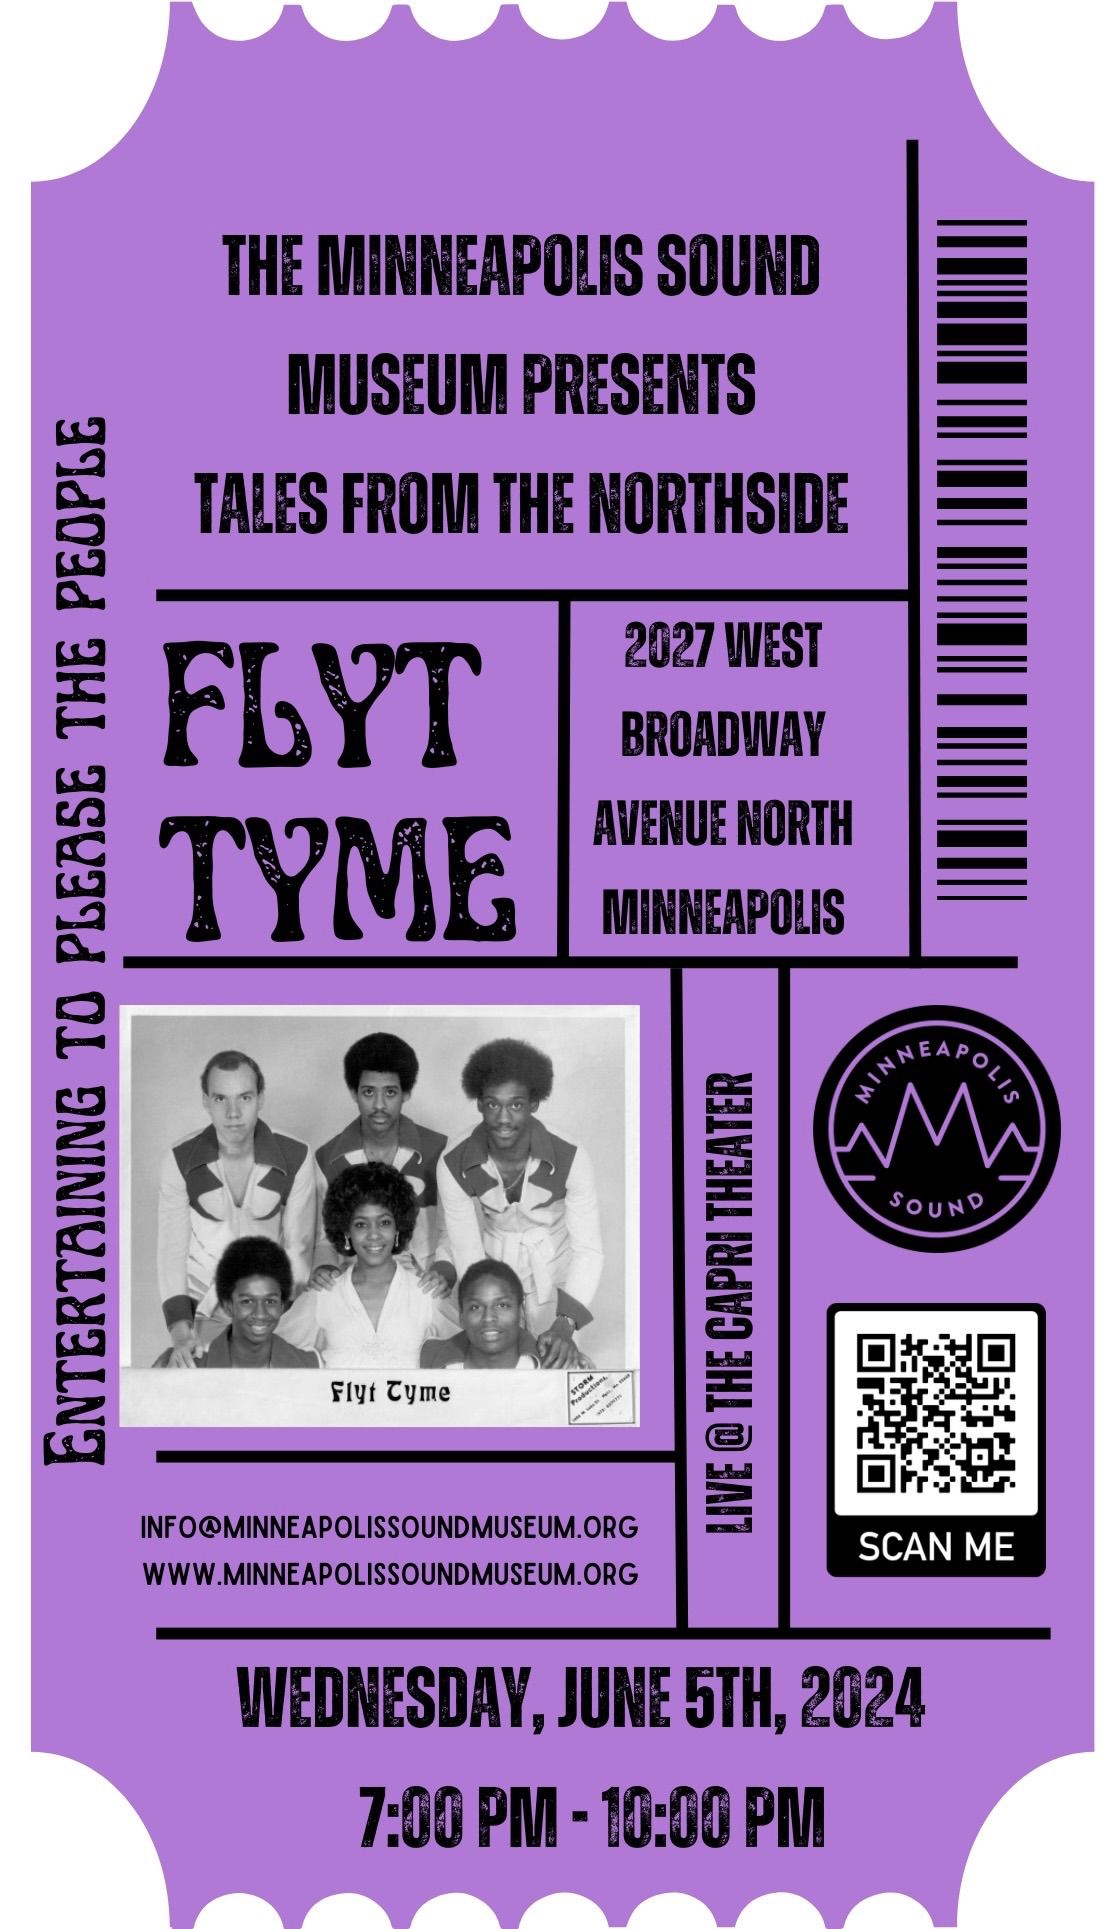 Tales From The Northside: Stories Of Flyt Tyme 